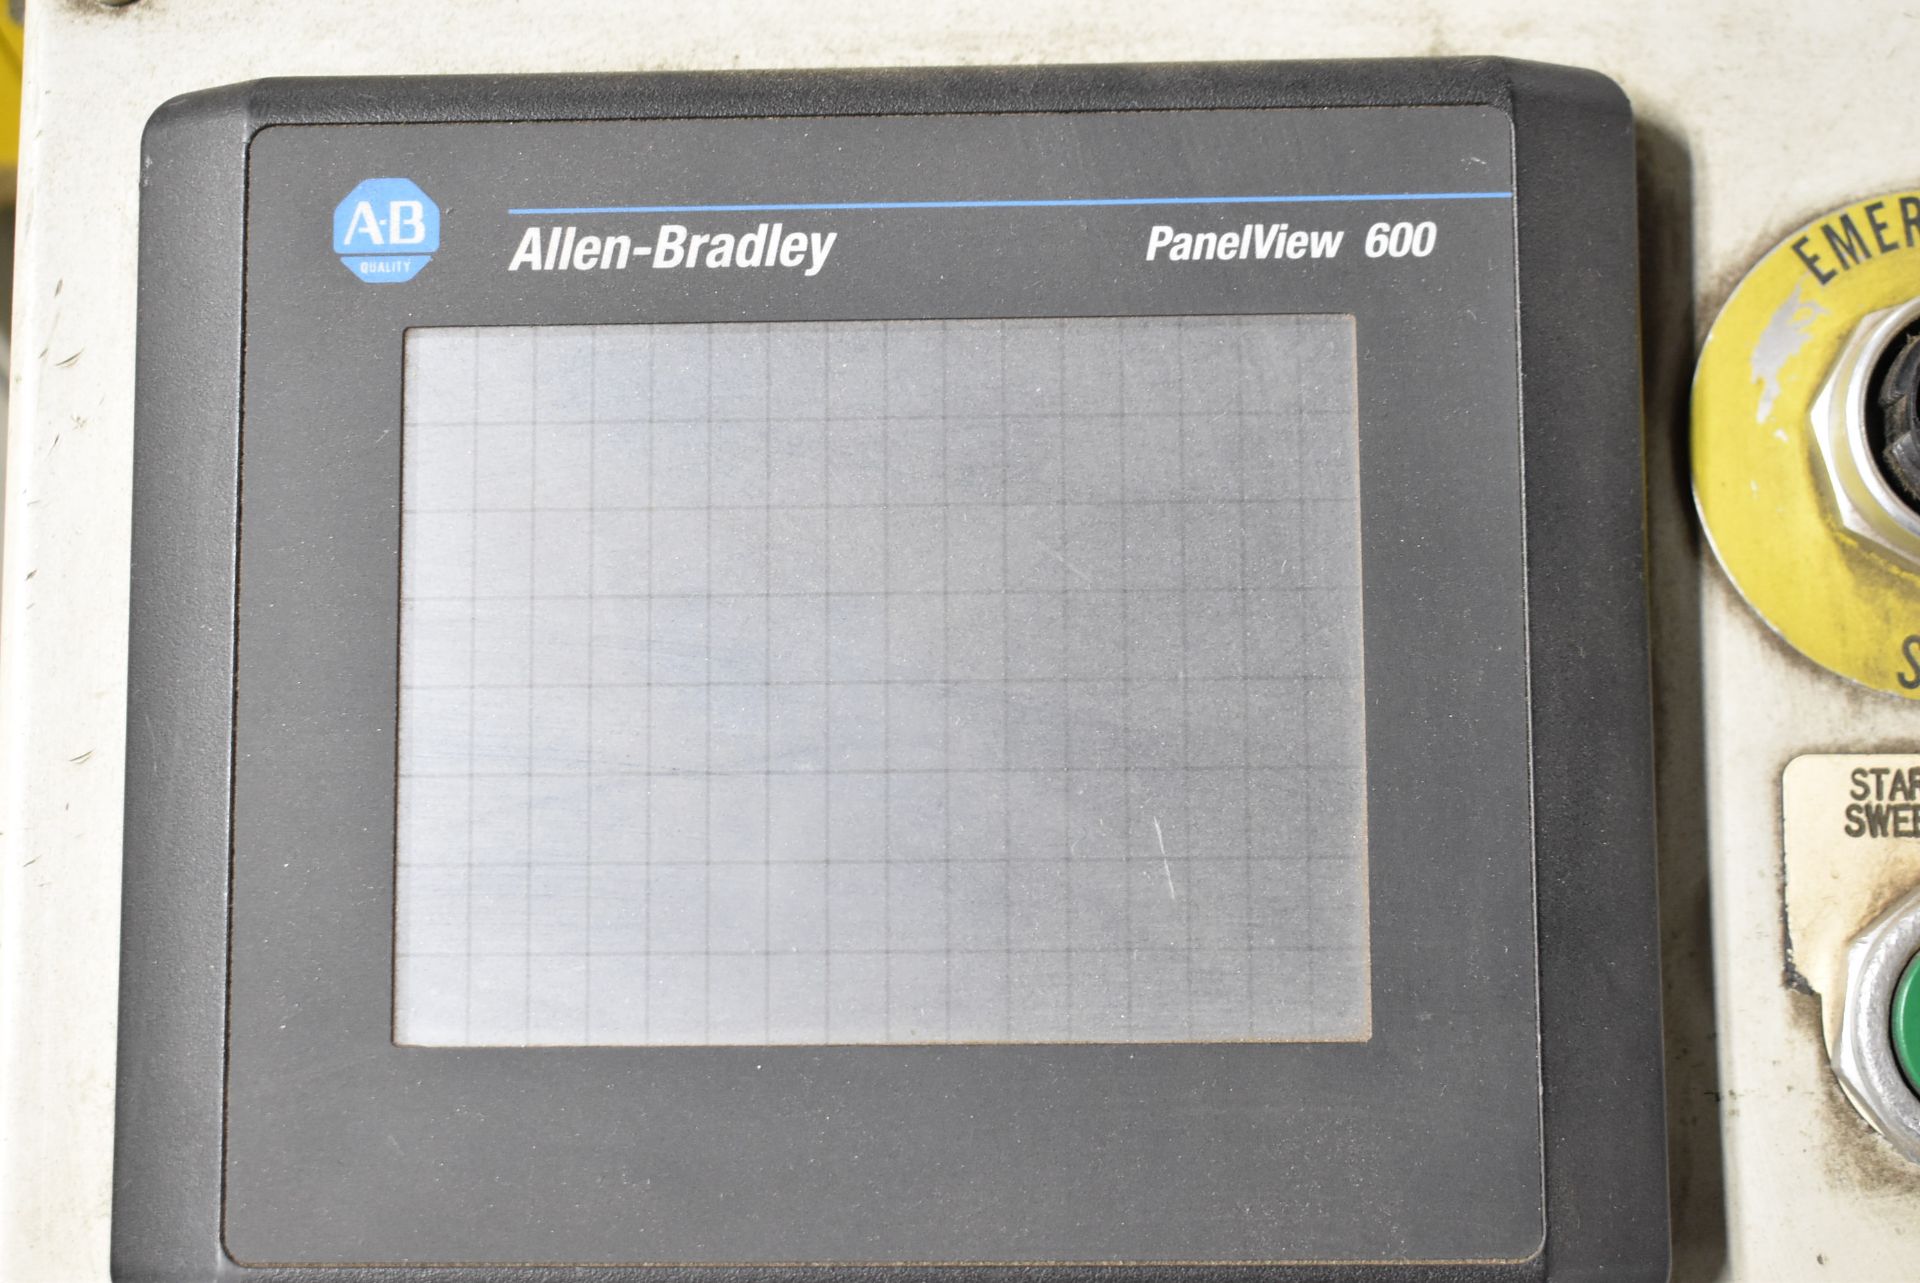 SARDEE INDUSTRIES 4000 DEPALLETIZER WITH ALLEN BRADLEY PANEL VIEW 600 TOUCH SCREEN CONTROL, BANNER - Image 39 of 40